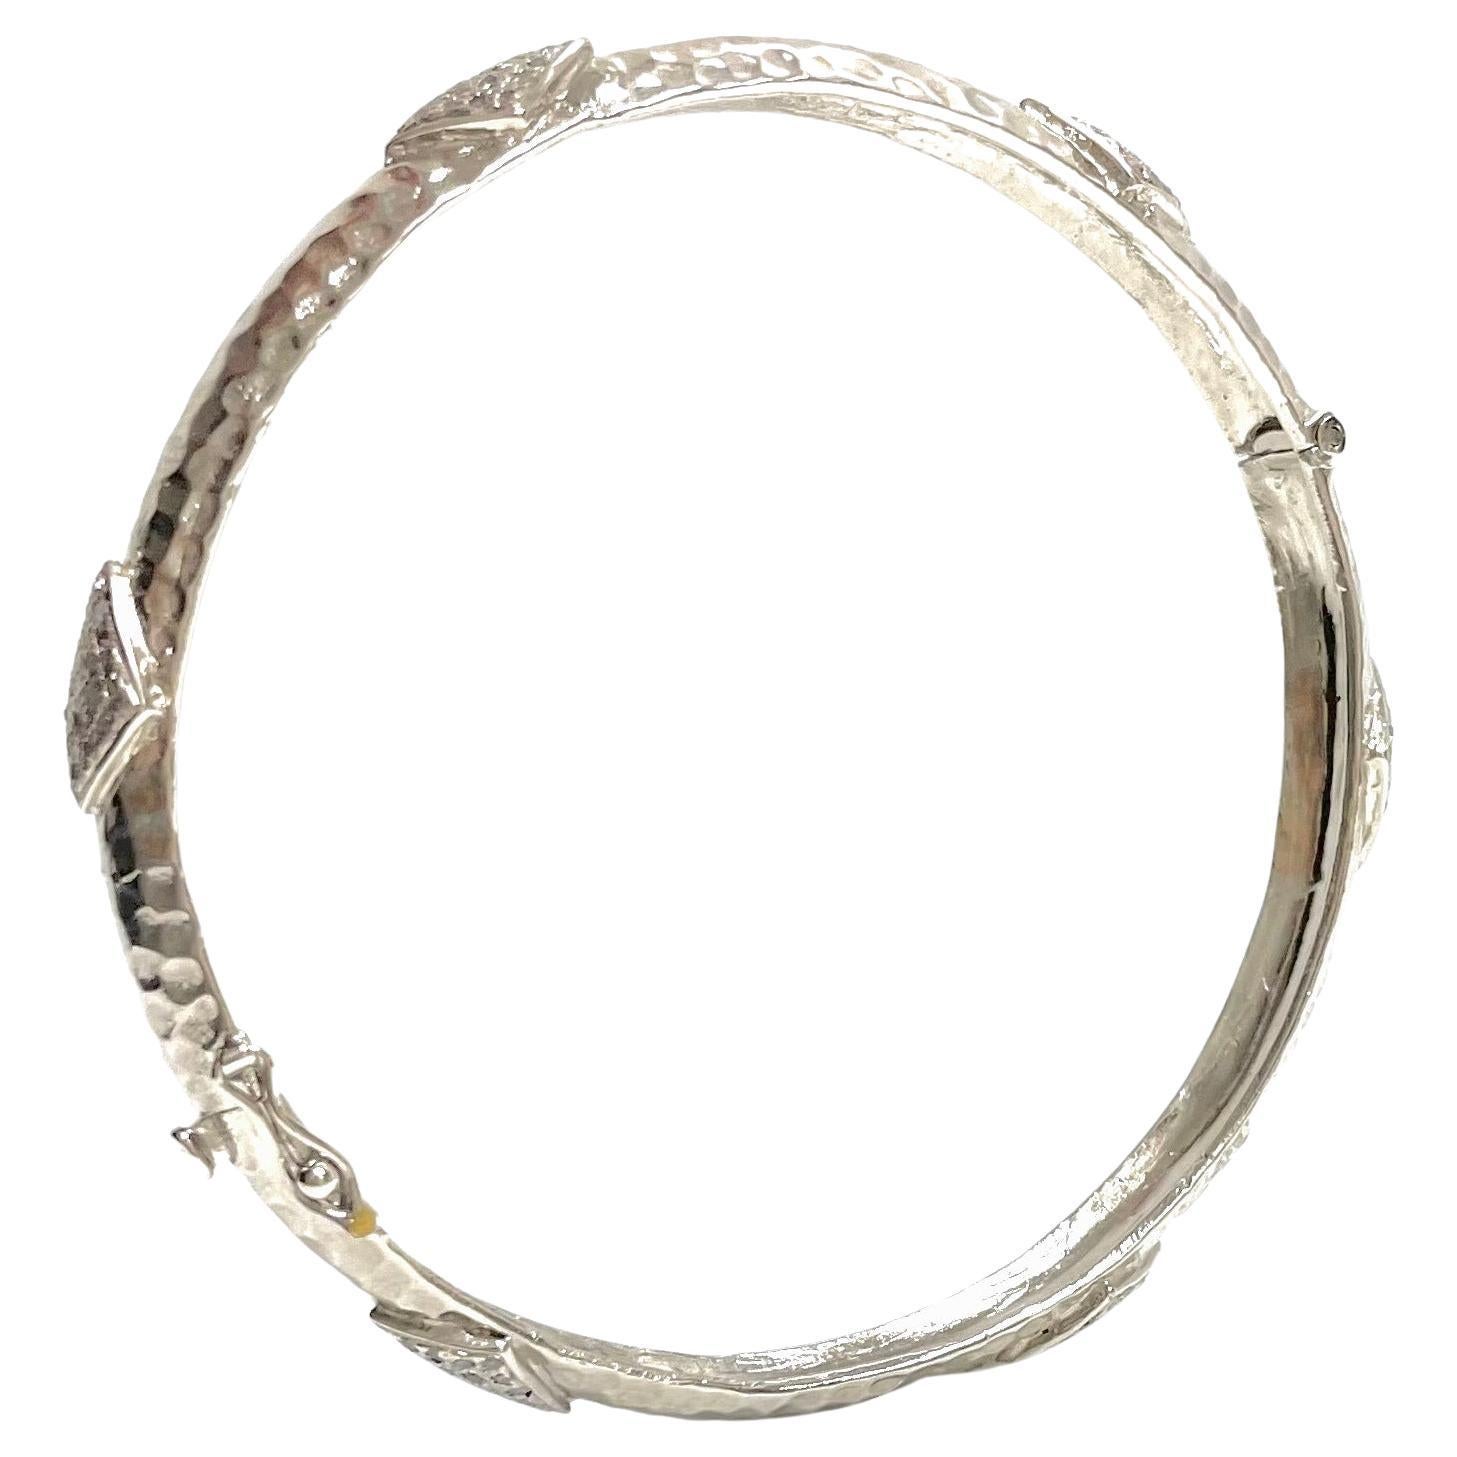  Hammered Rhodium-Plated Silver Bangle with Diamonds Paradizia Bracelet For Sale 4